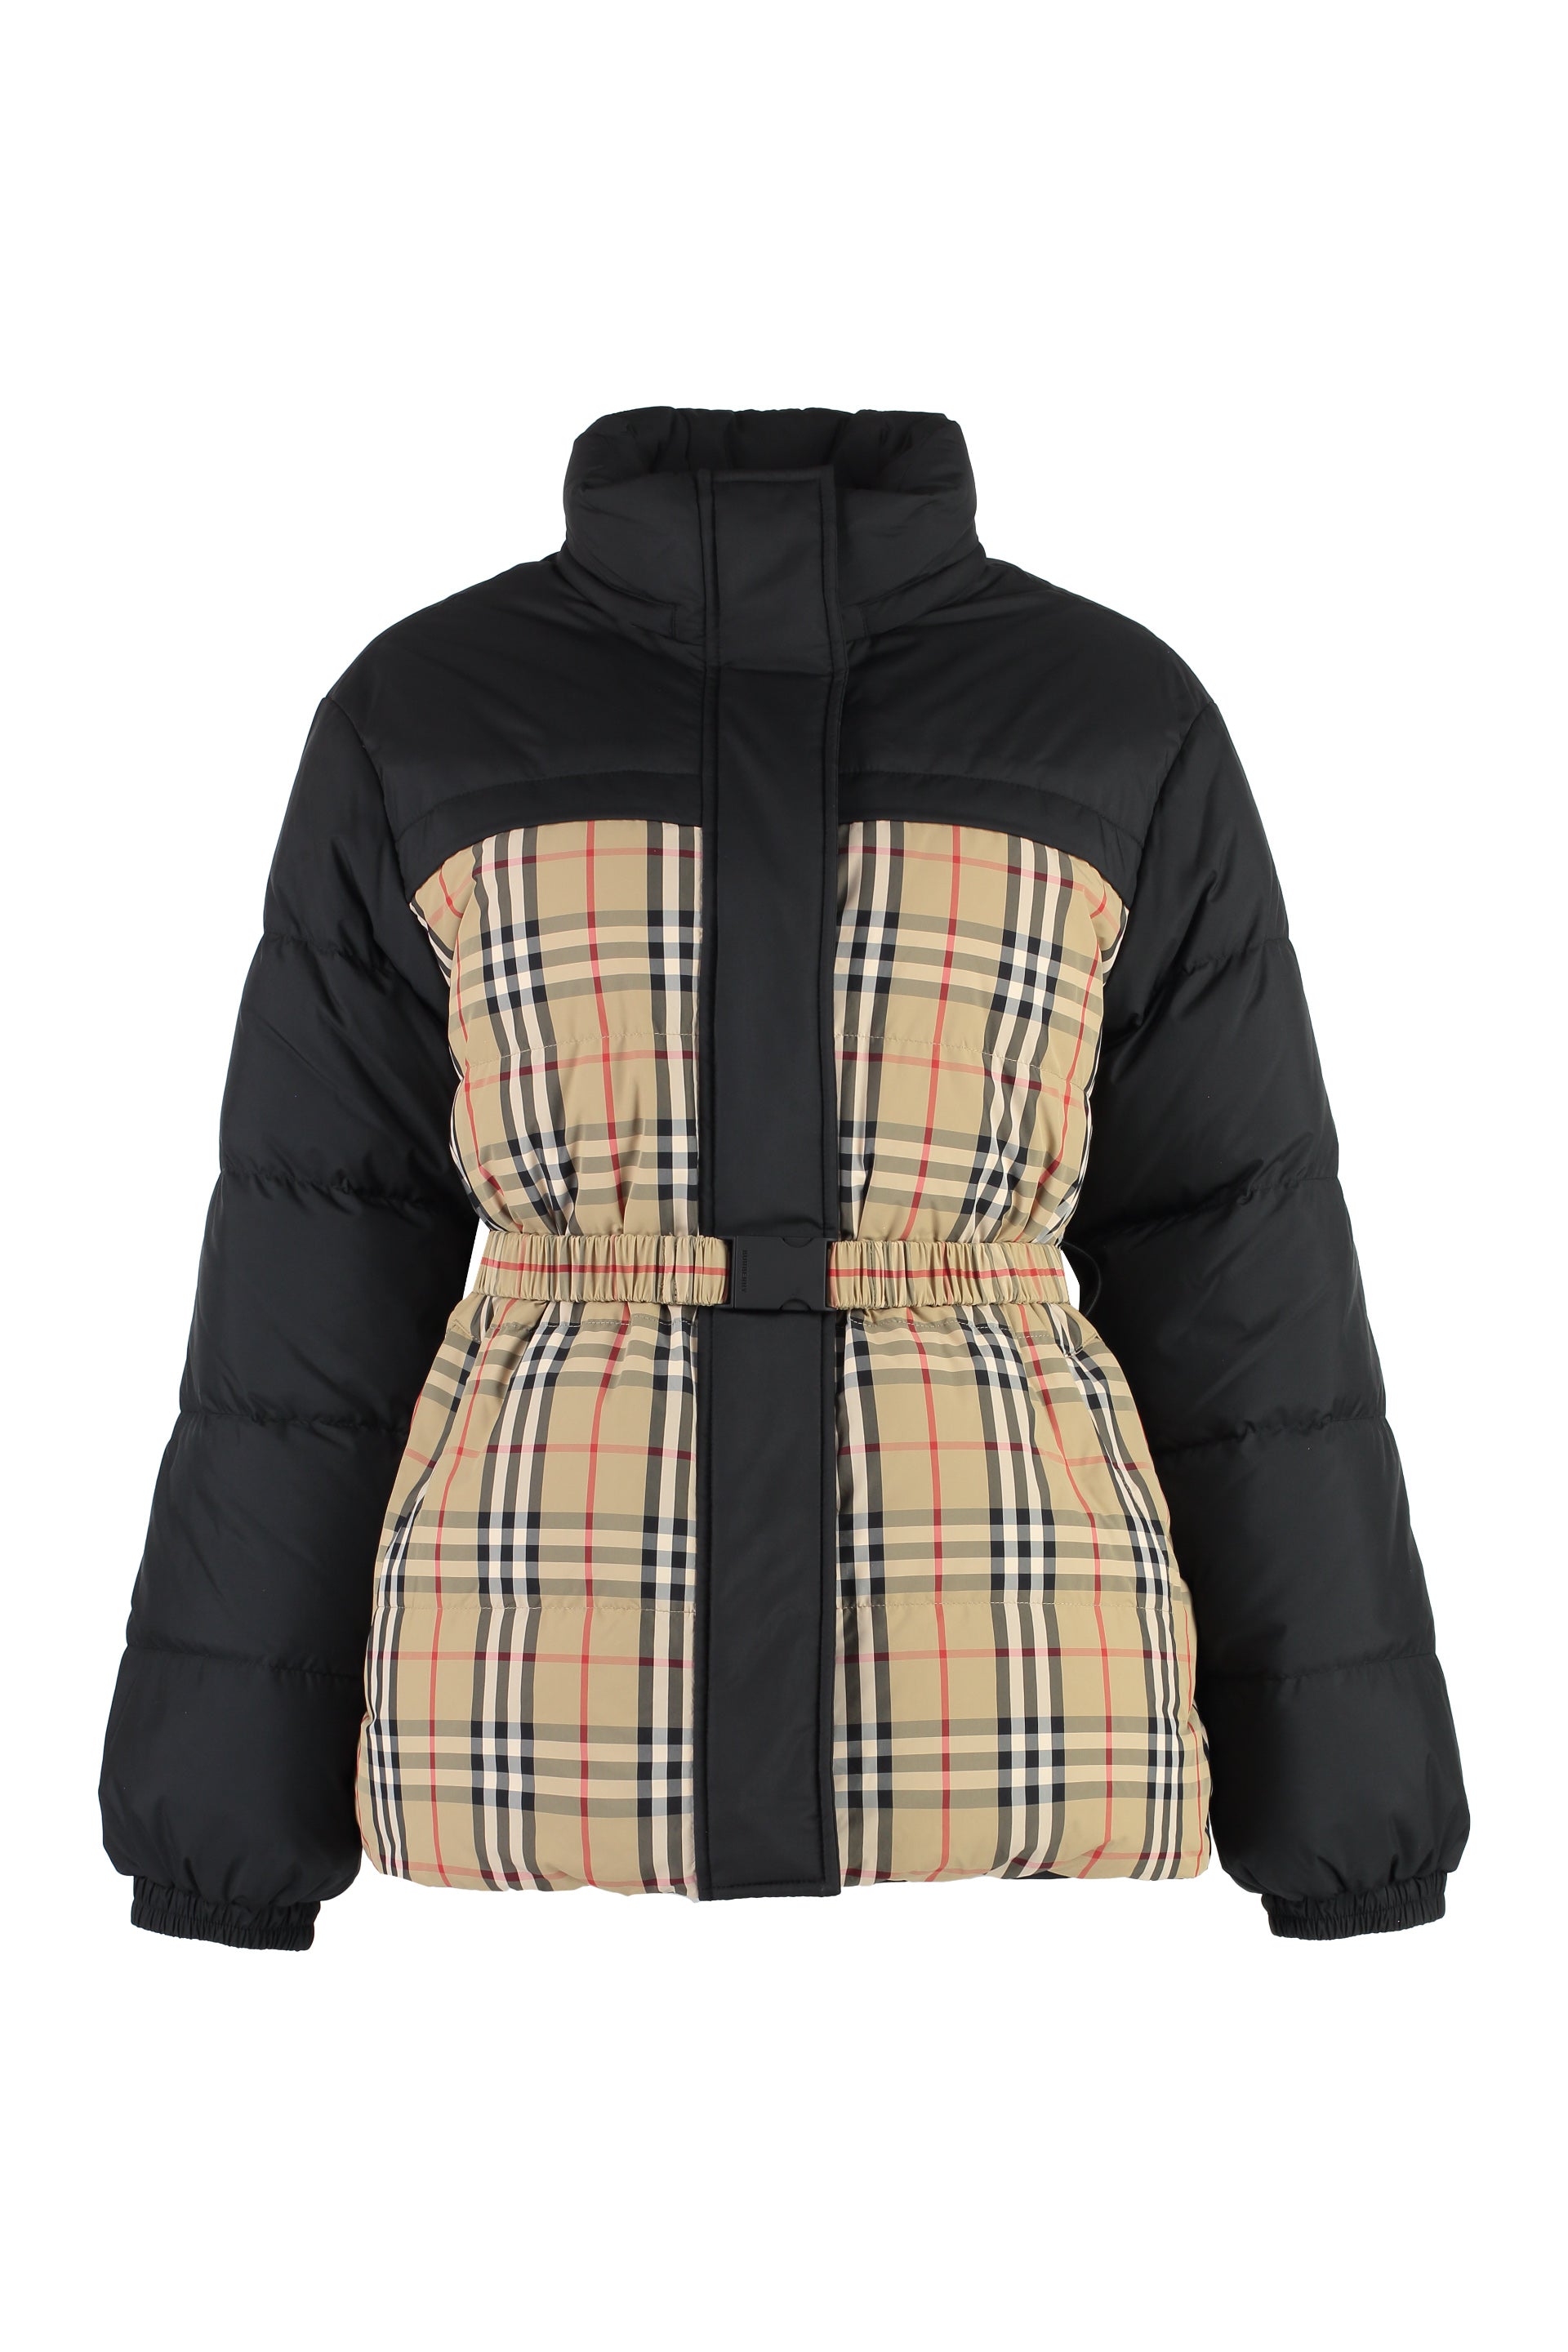 Shop Burberry Reversible Hooded Down Jacket For Women In Black